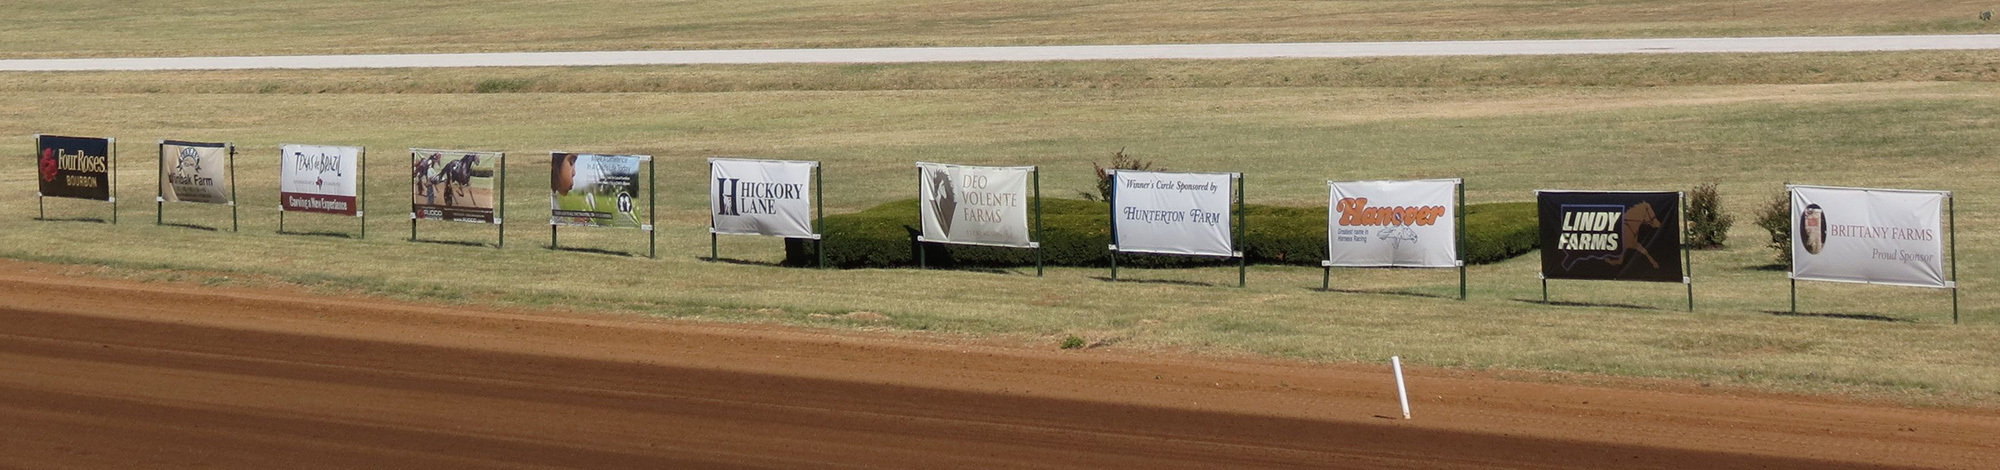 Sponsorship banners during the race